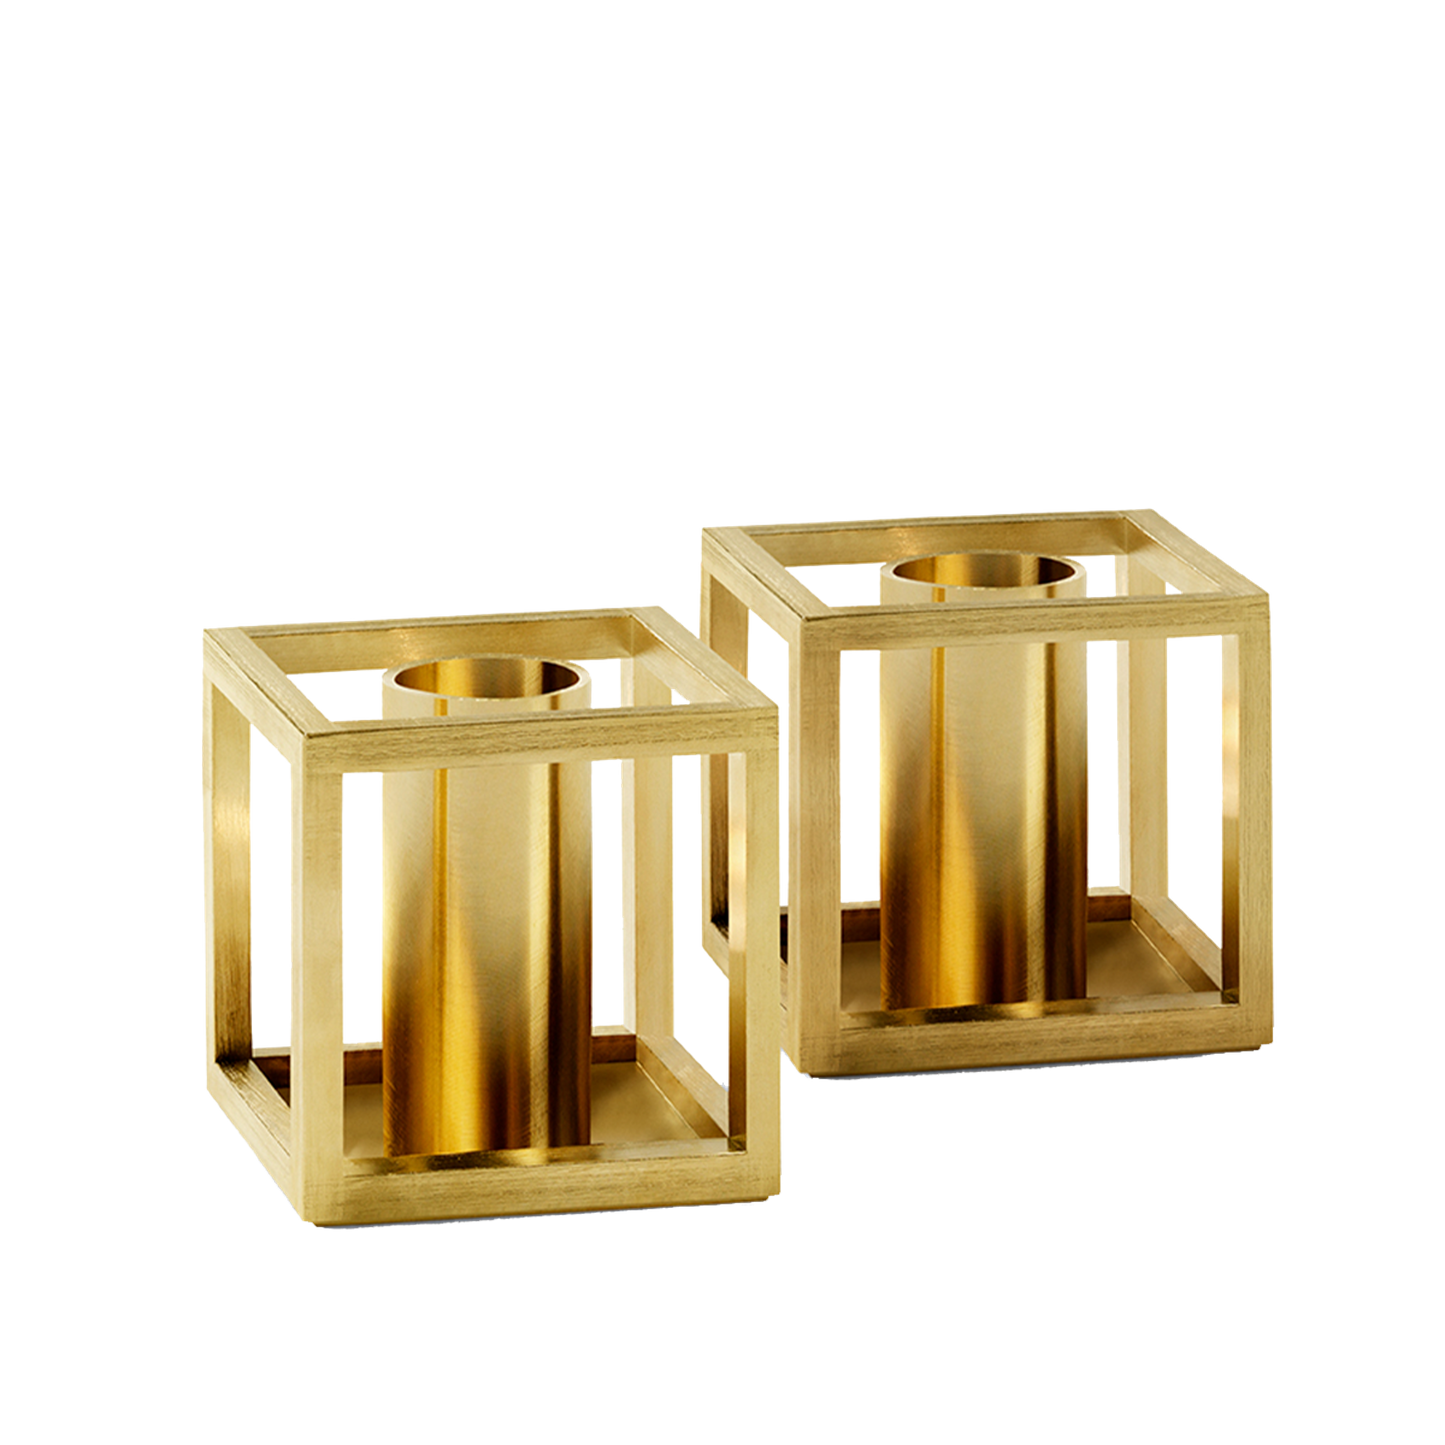 Cube Micro Candlestick 2 Pcs. by Audo #Gold Plated